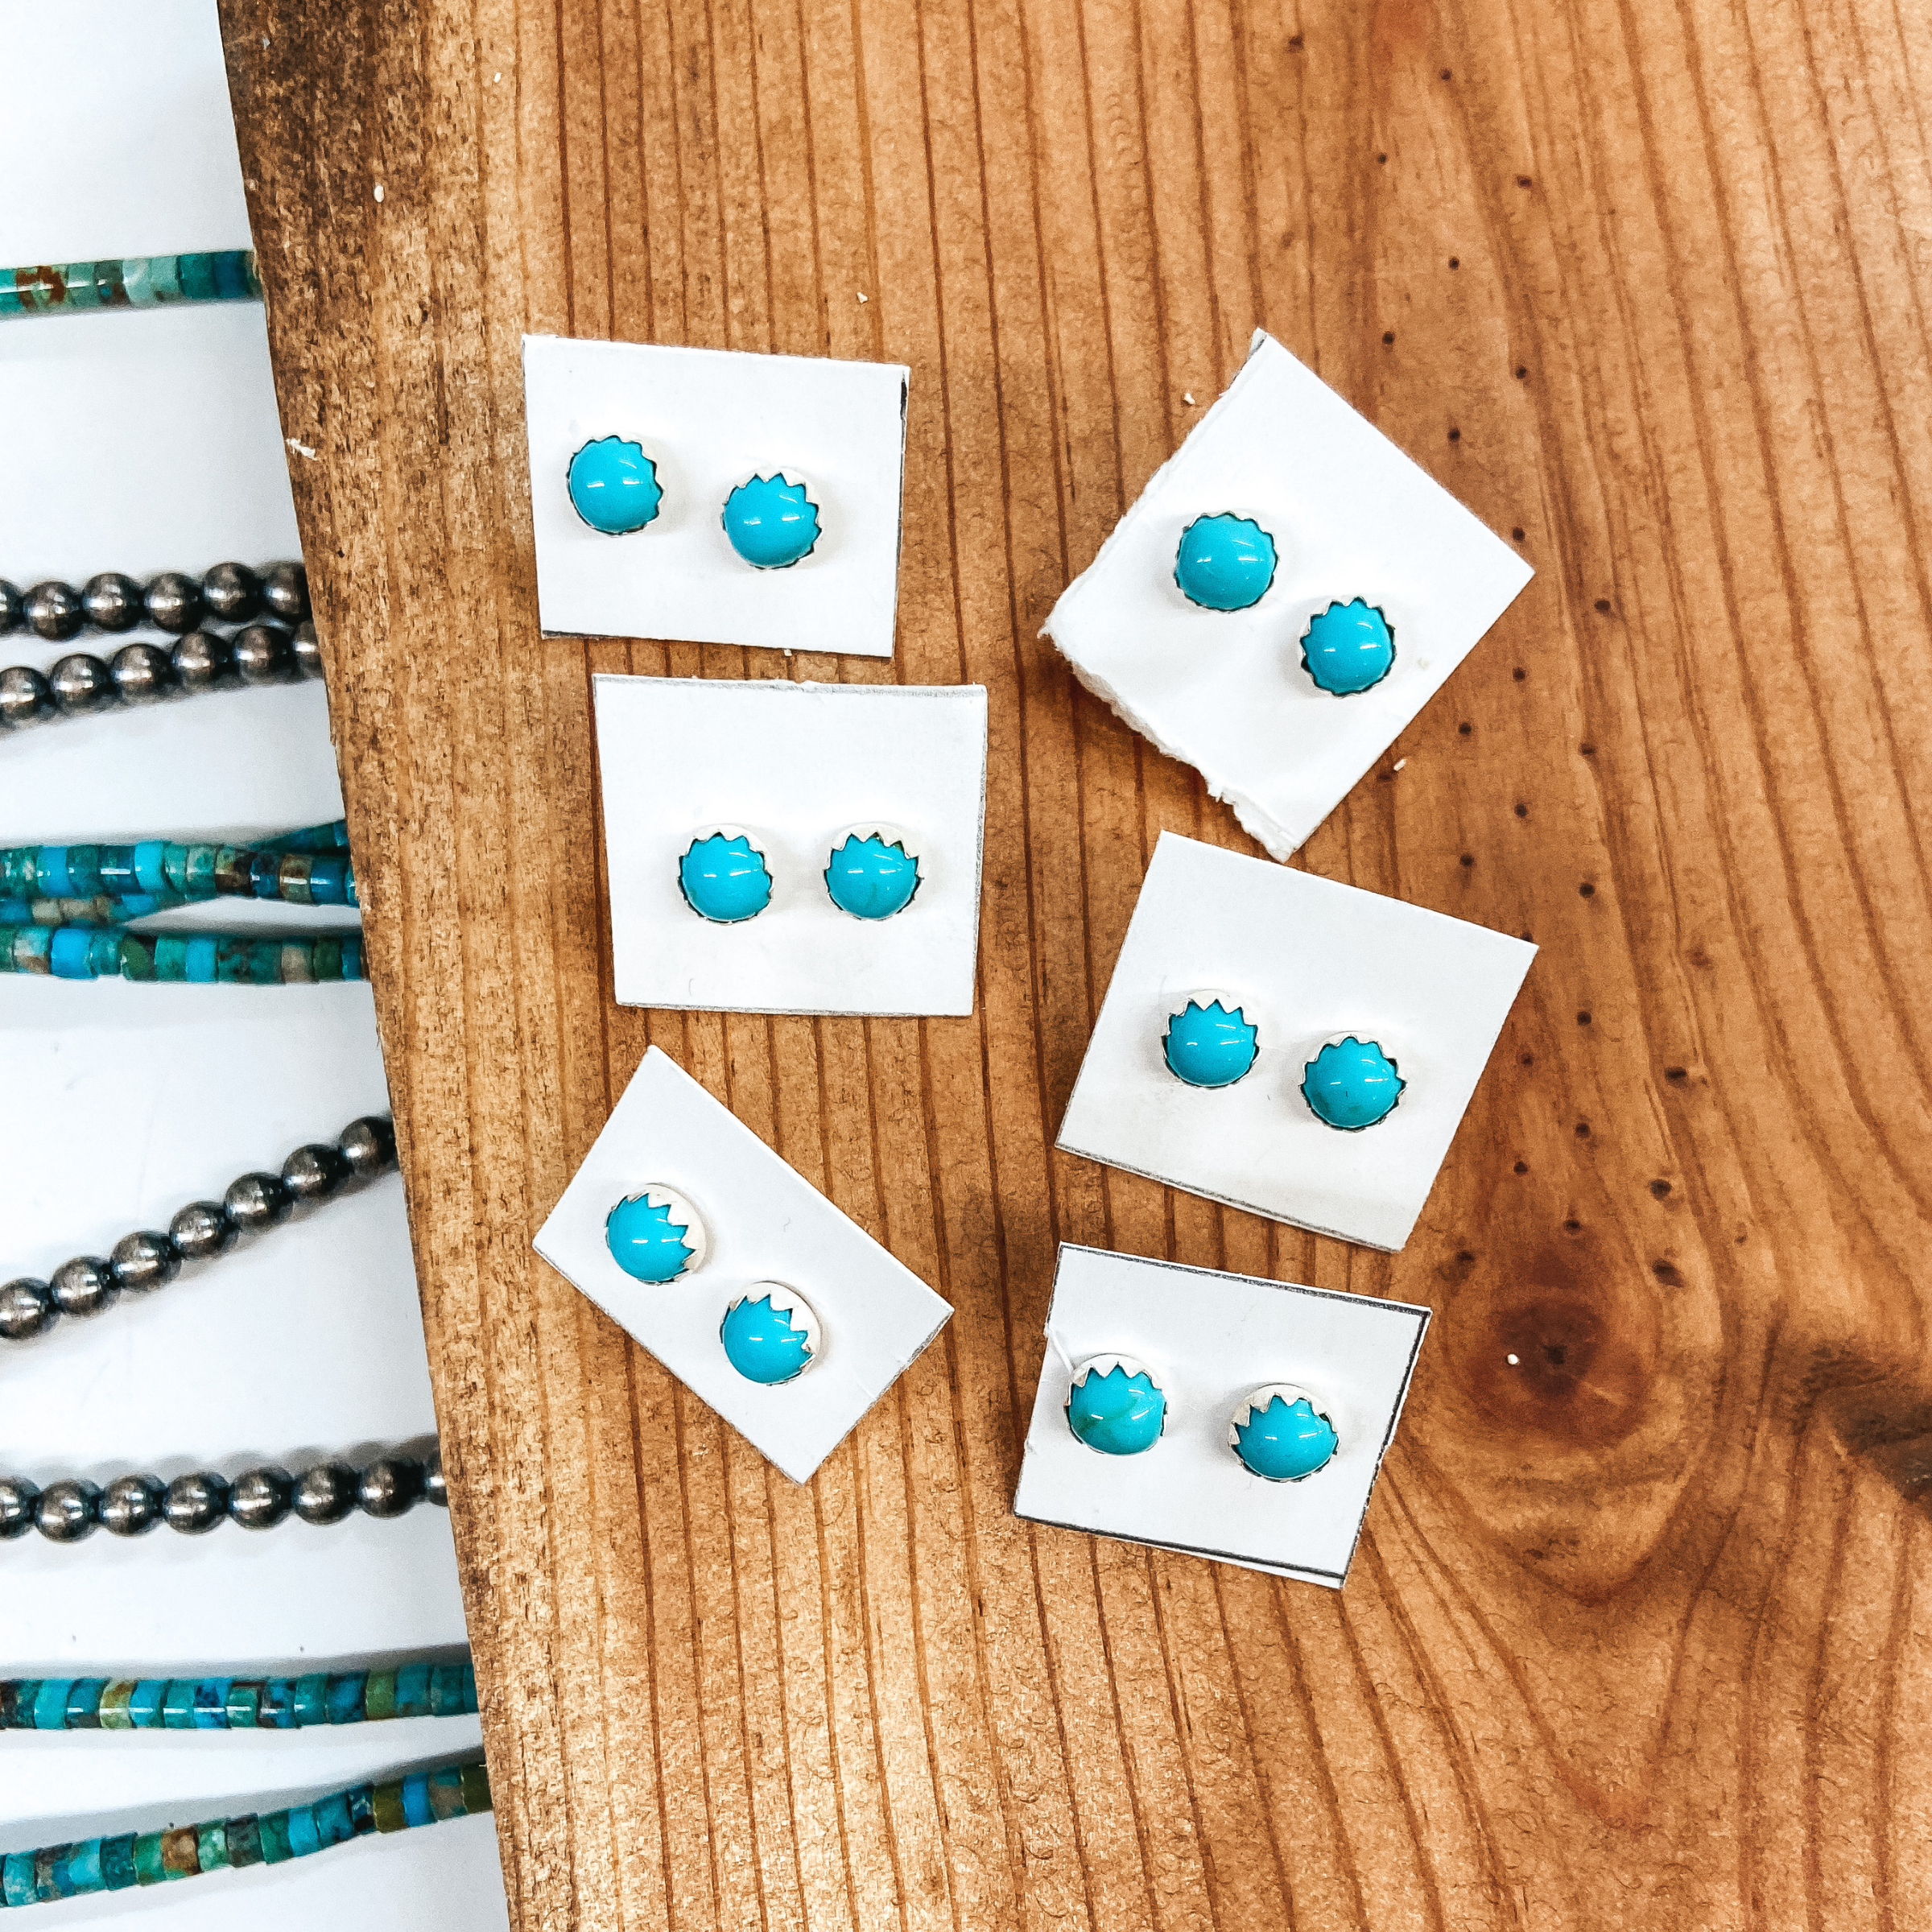 Sterling silver and genuine turquoise stud earrings placed on wooden slat.